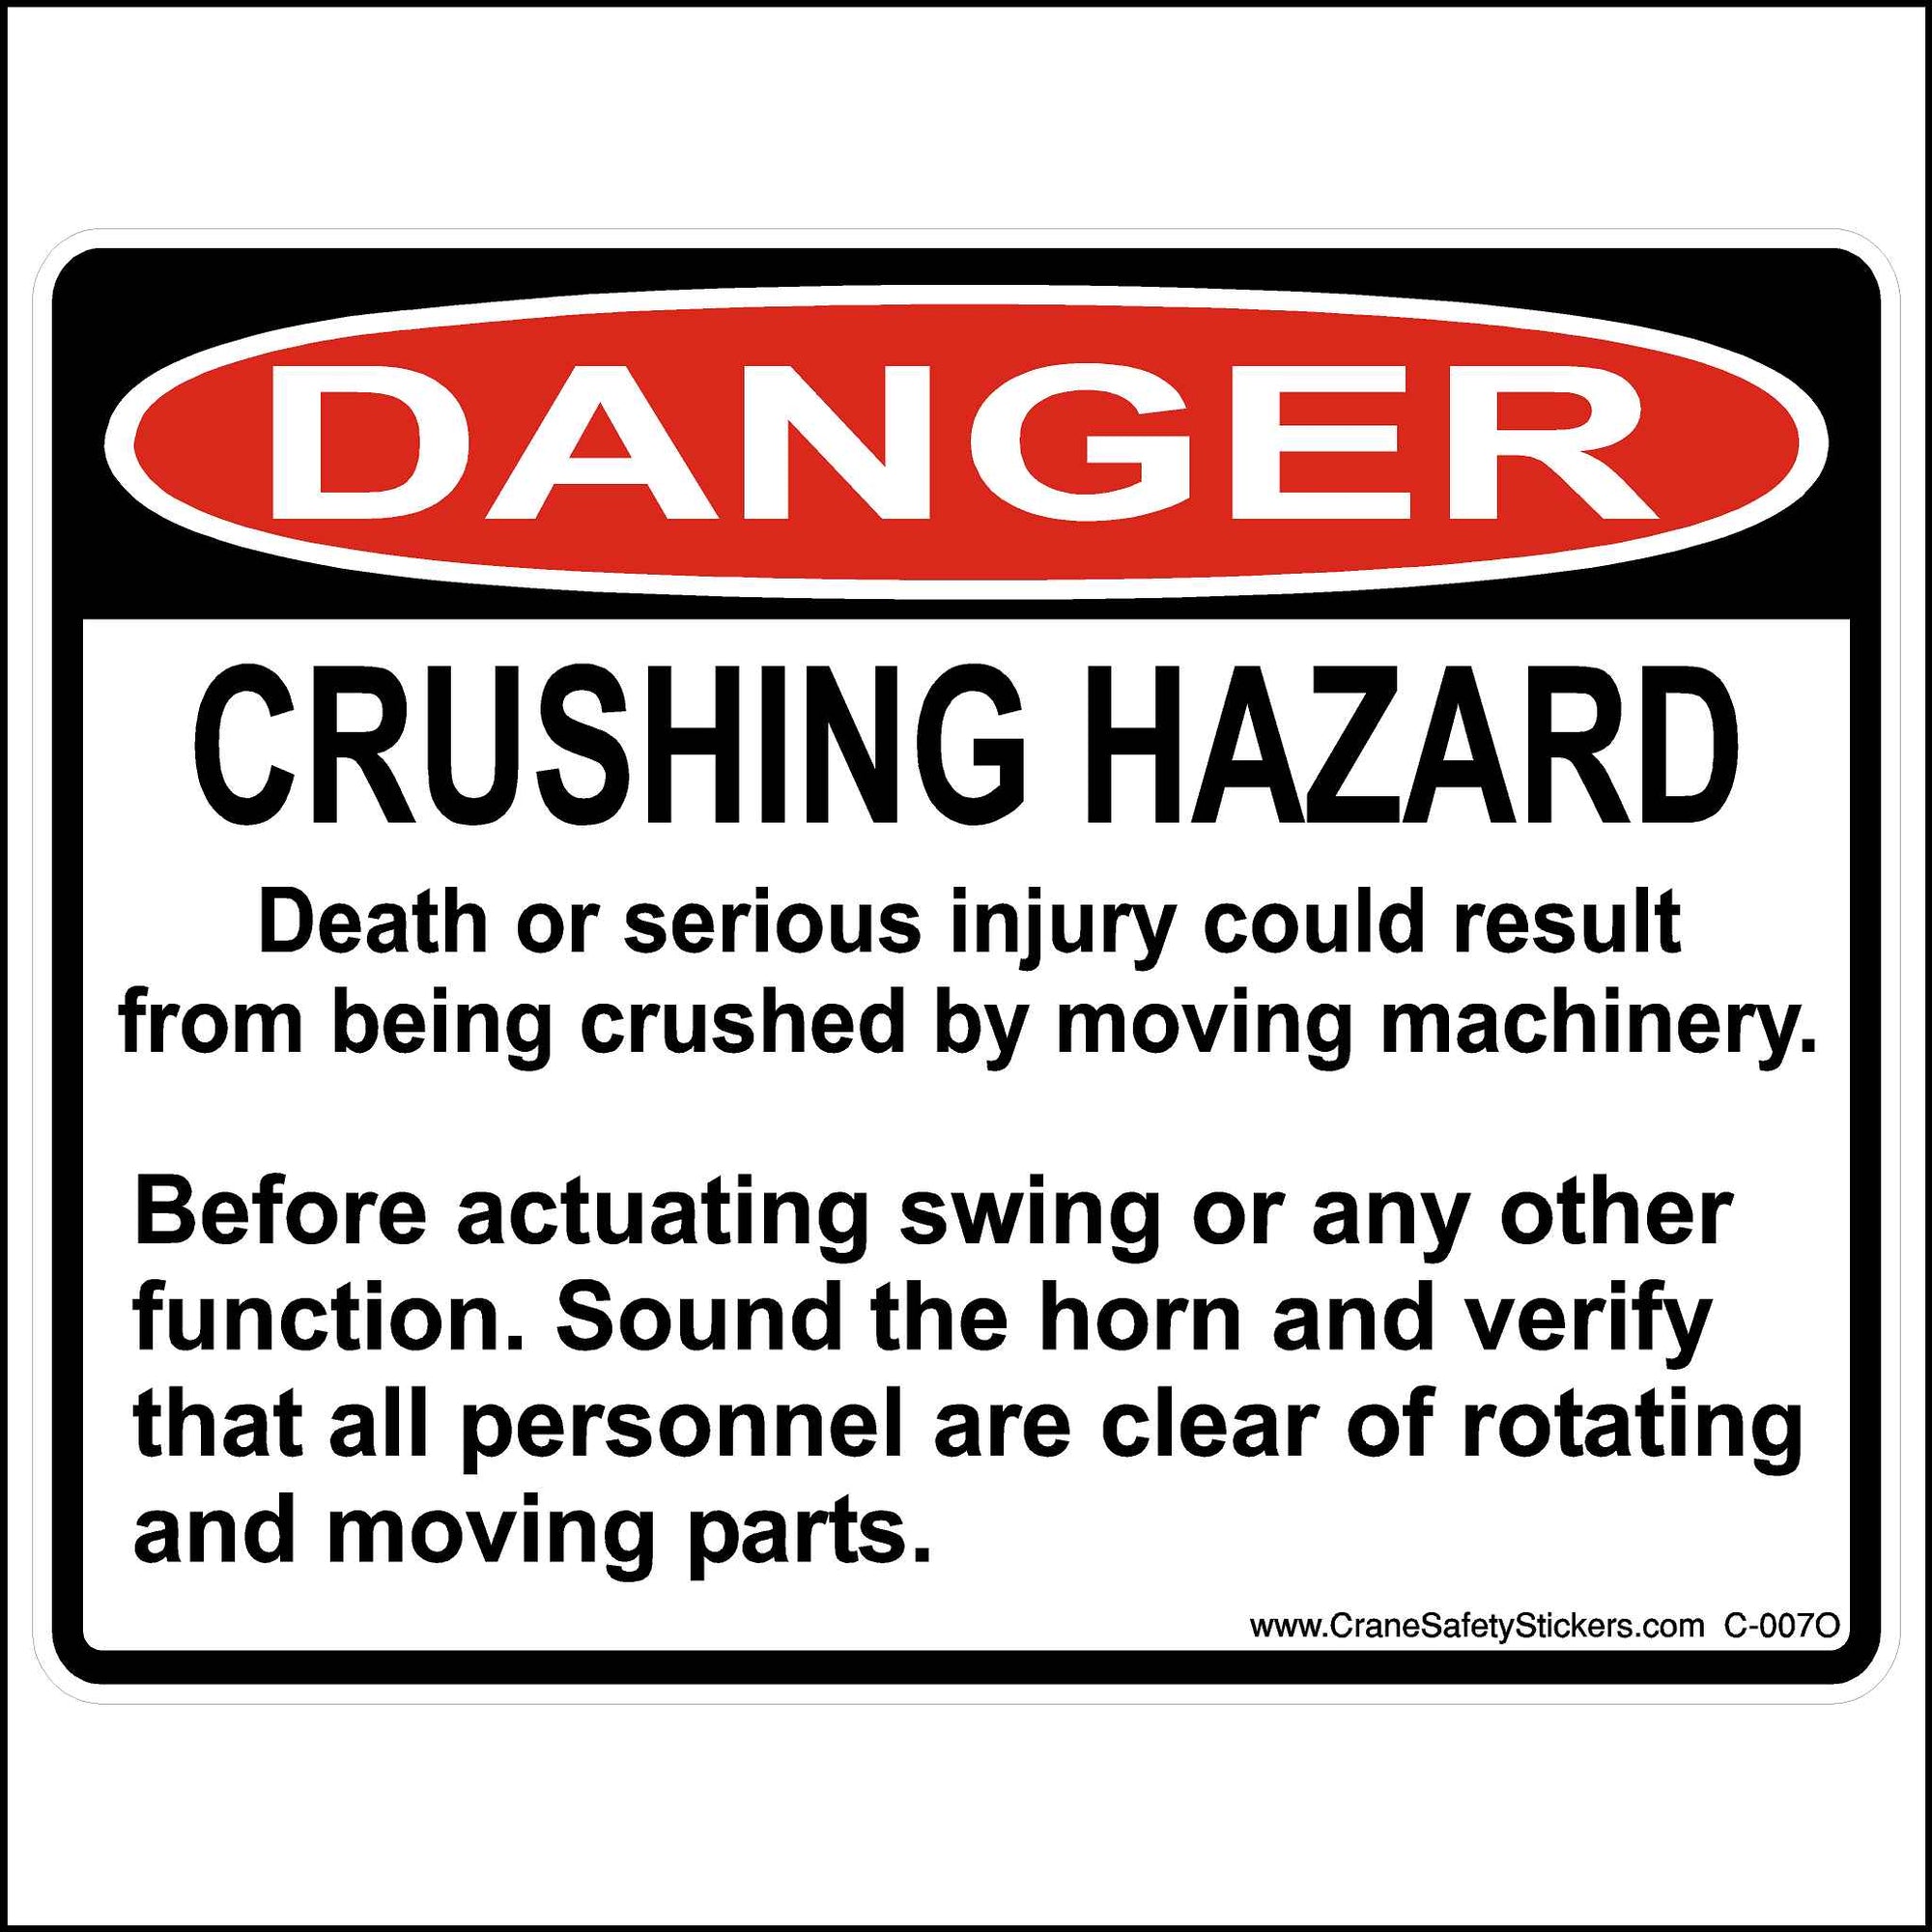 OSHA Crush Hazard Sticker Printed With, DANGER Crushing Hazard. Death or serious injury could result from being crushed by moving machinery. Before actuating swing or any other function. Sound the horn to verify that all personnel are clear of rotating and moving parts.